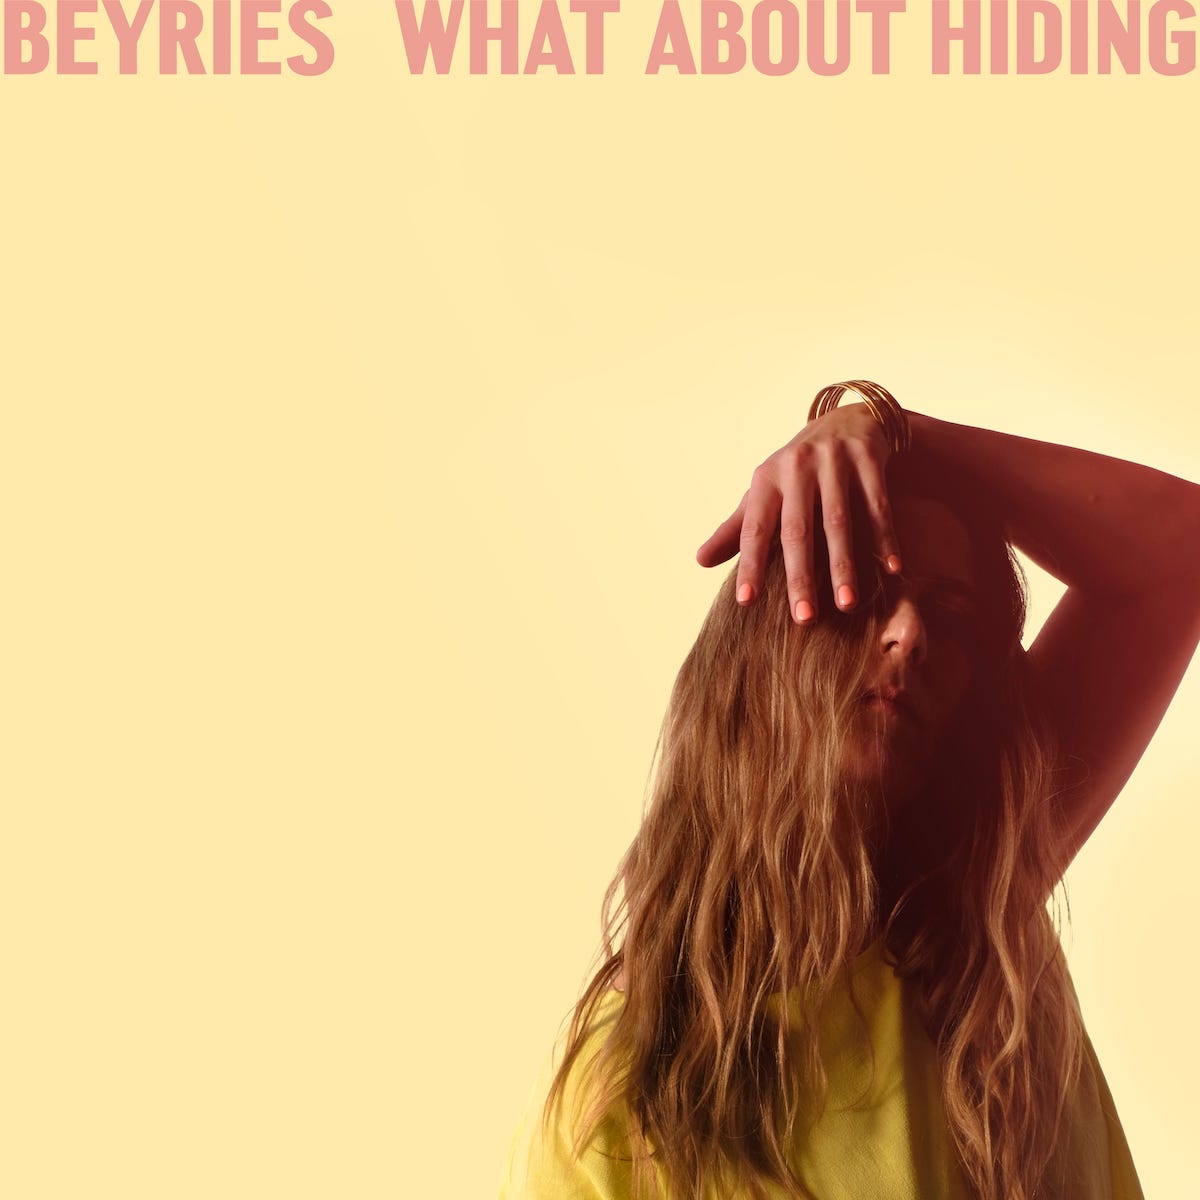 What About Hiding (single)